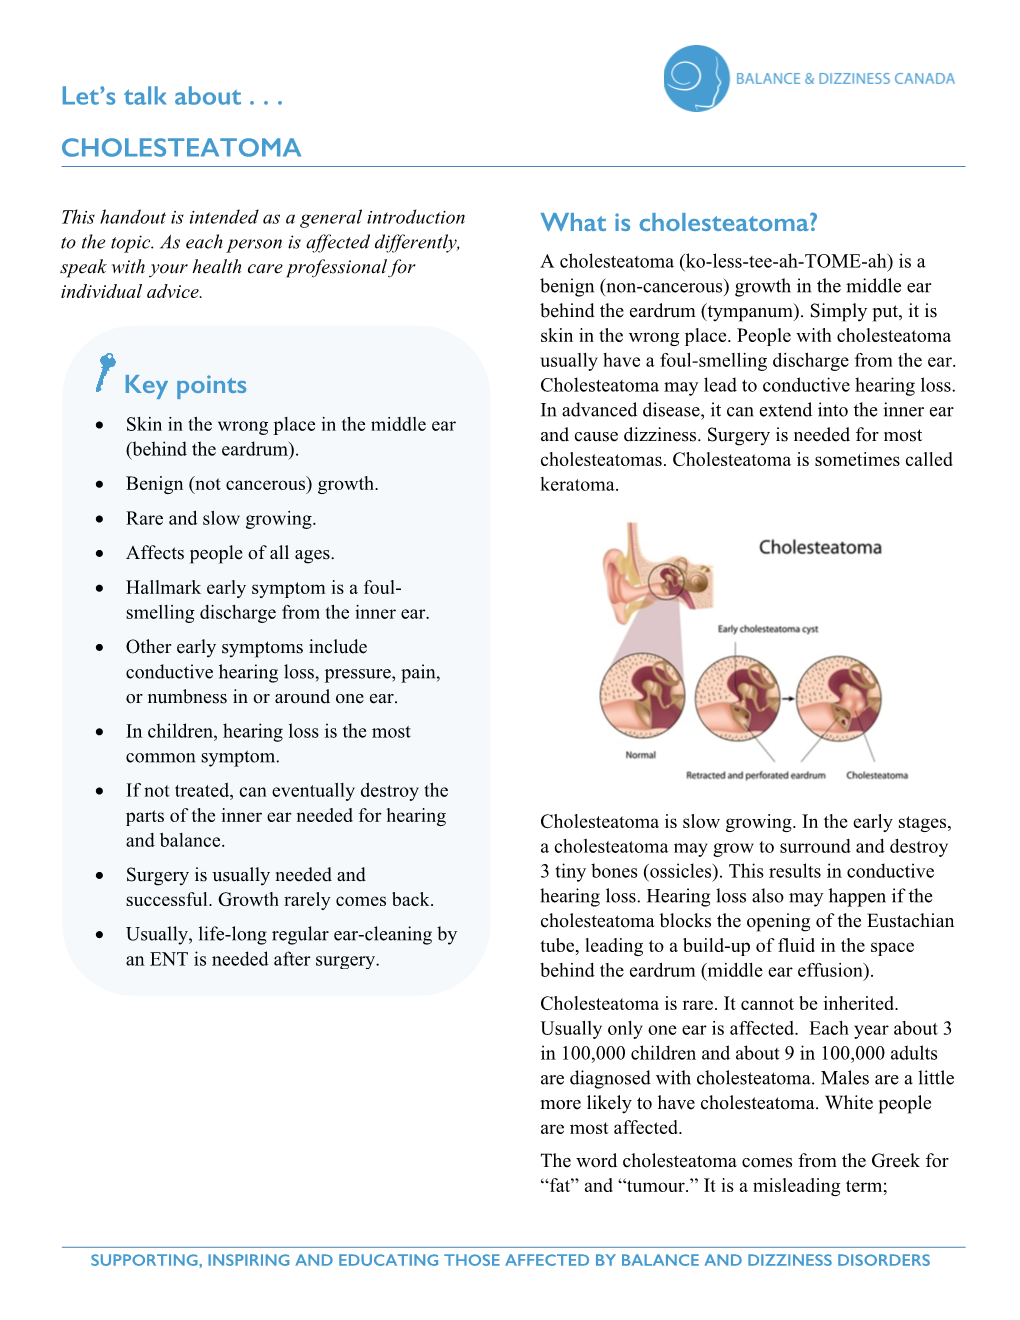 Let's Talk About . . . Cholesteatoma